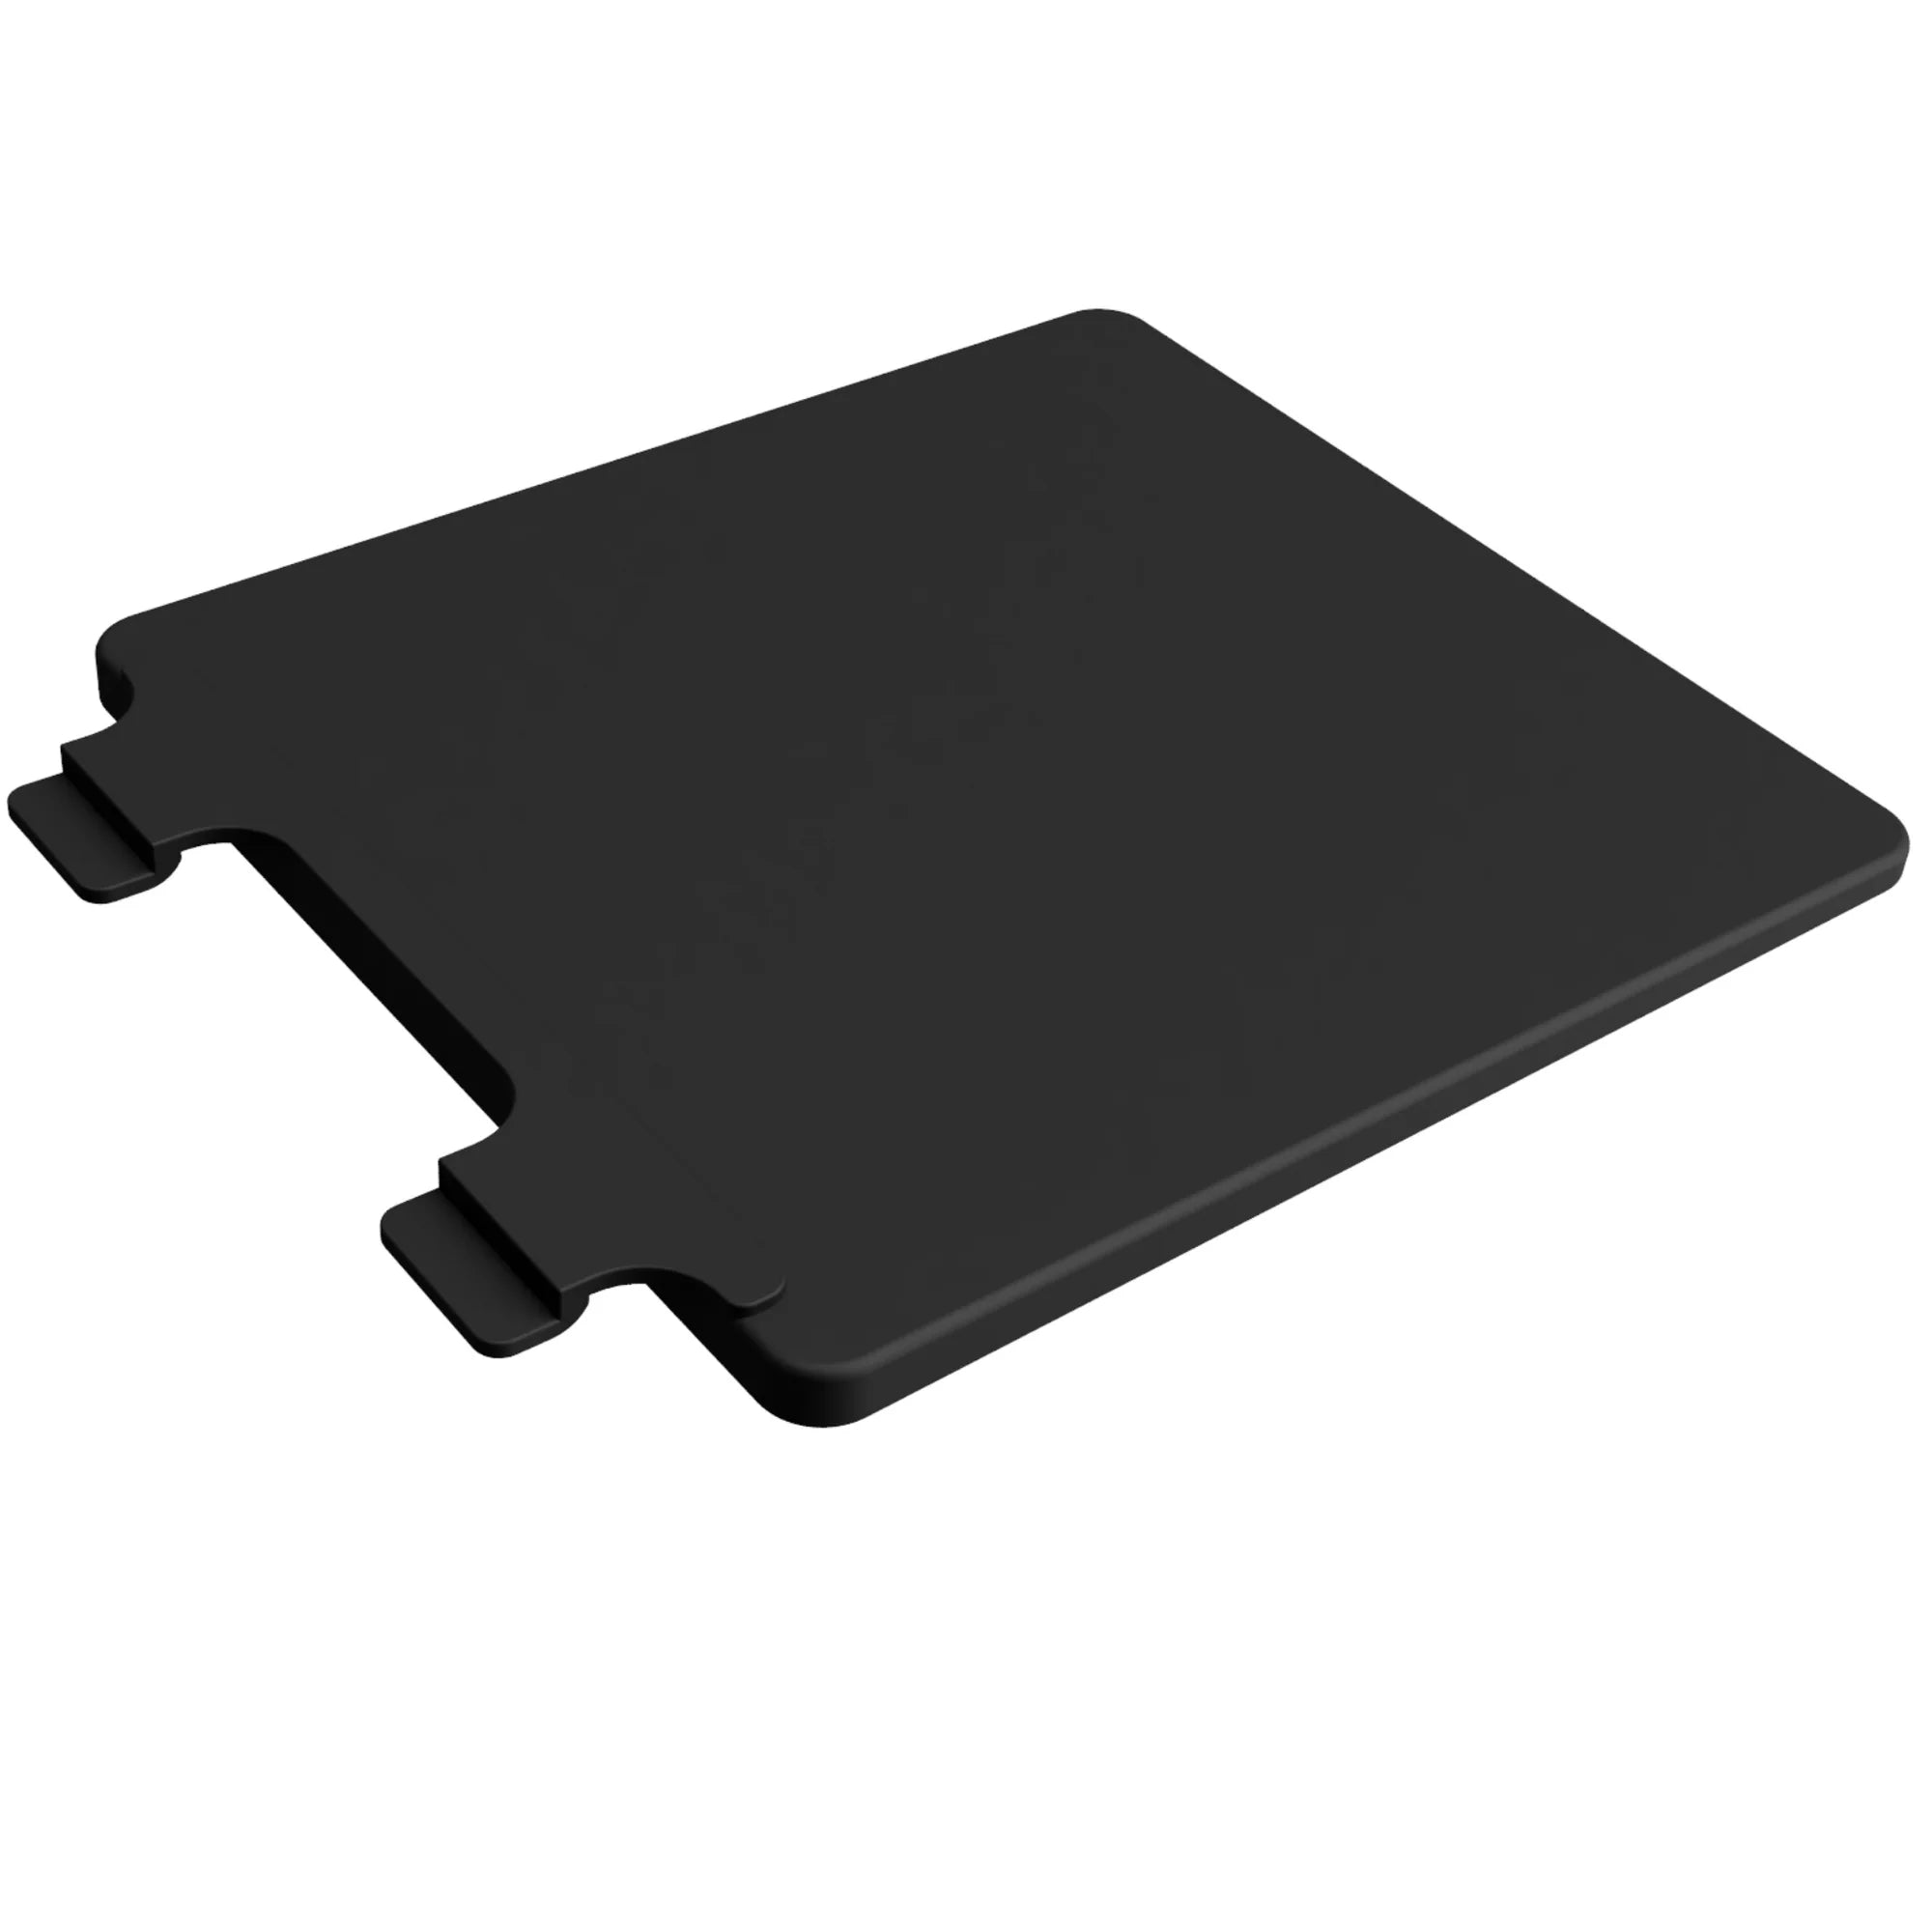 theStand Mouse Pad Extension (Pre-Order: Ships Late Mar'24)